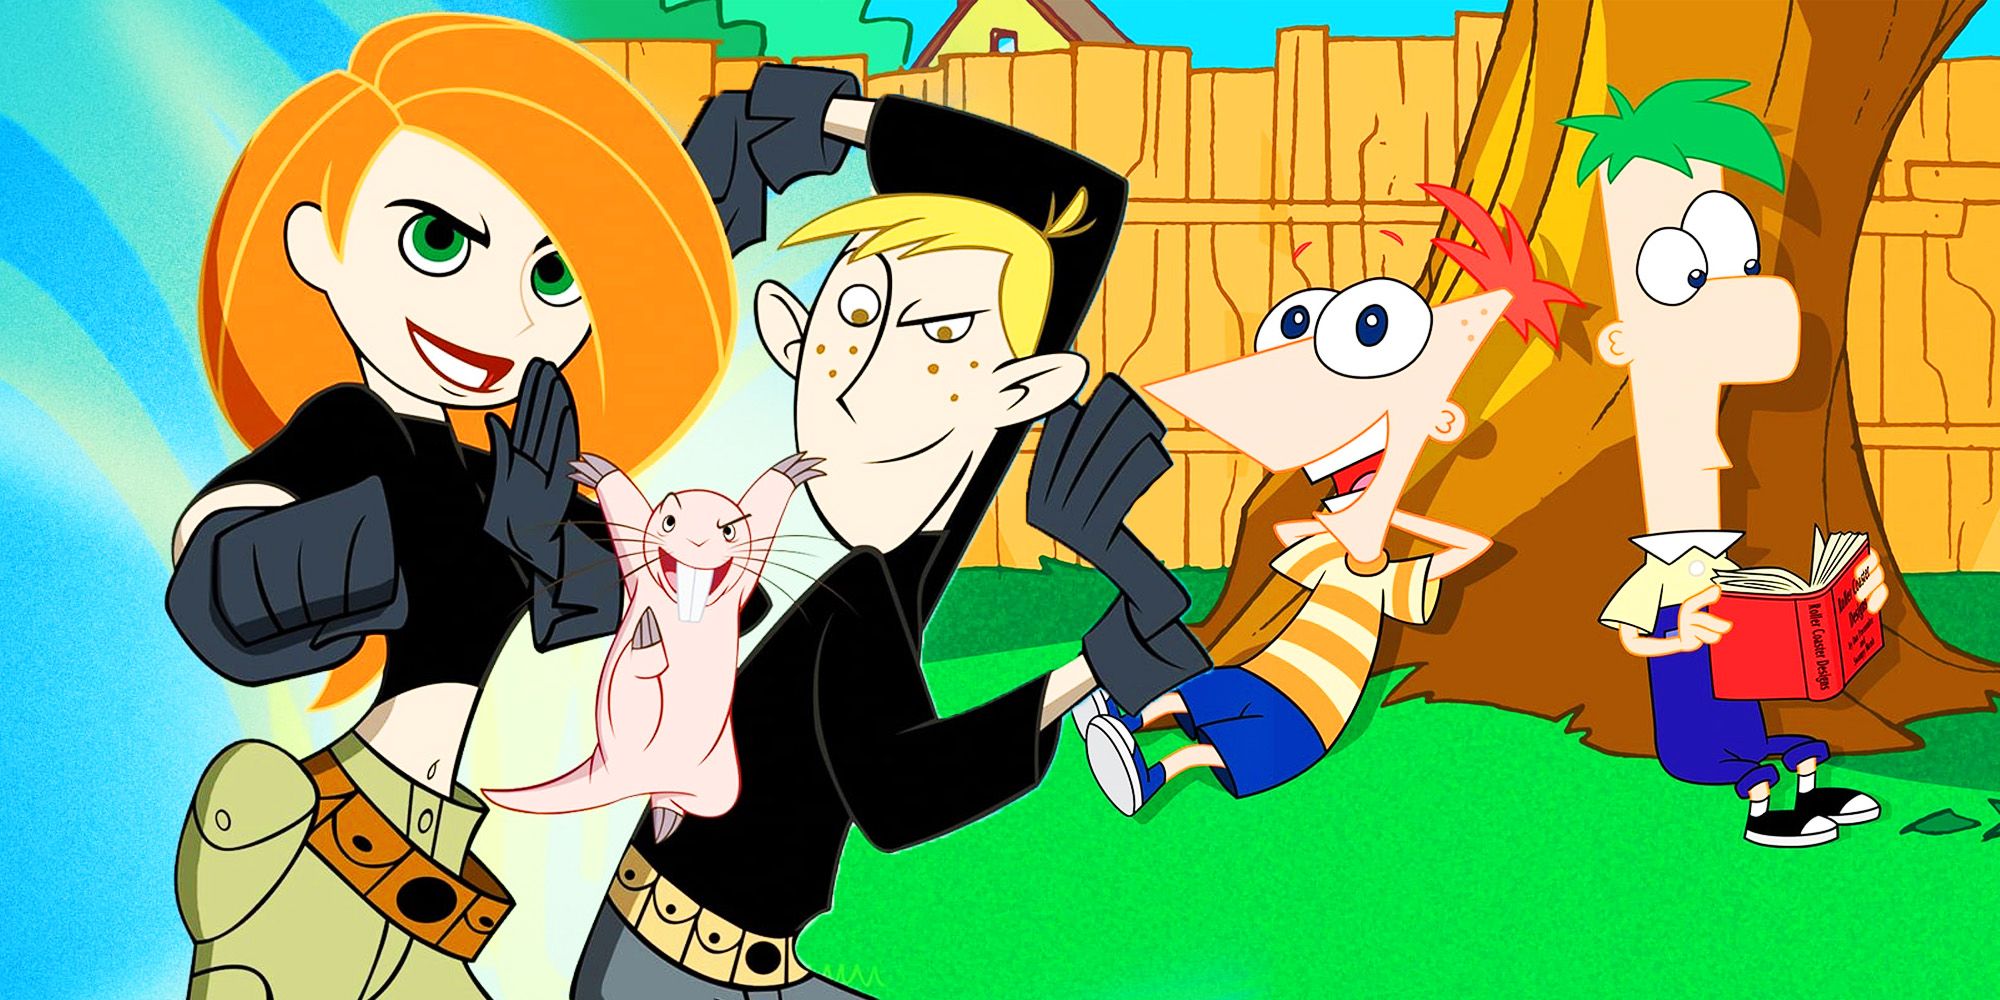 the Phineas and Ferb and Kim Possible animated shows.